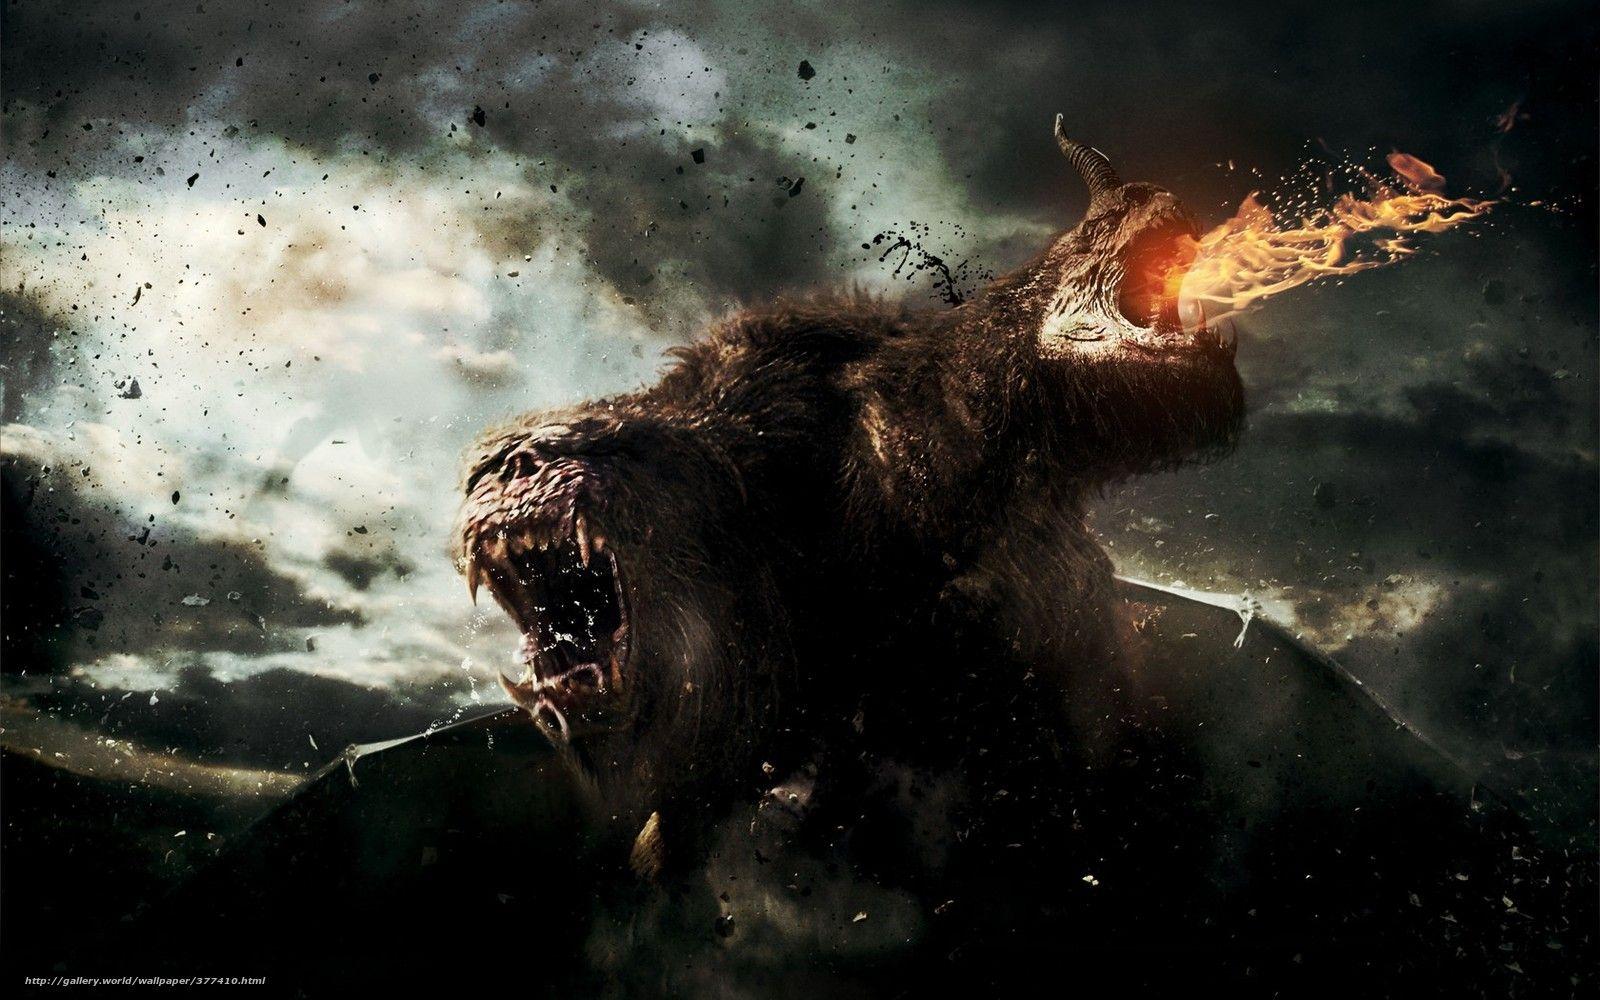 Download wallpaper wrath of the titans, Gods, Monsters, chimera free